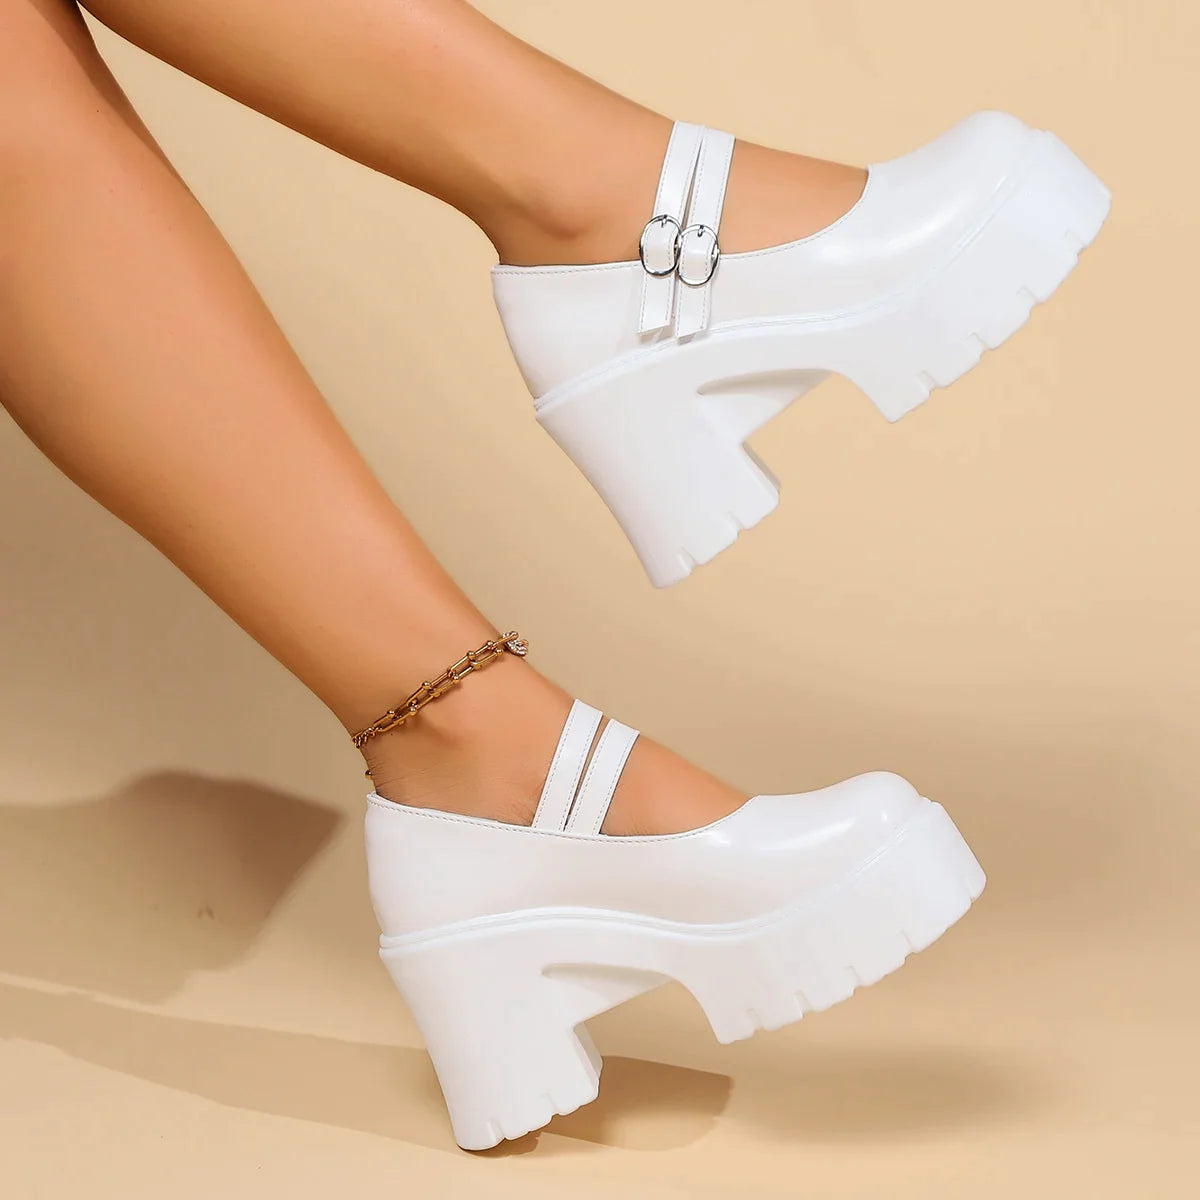 Gominglo - Super High Heels Mary Jane Shoes for Women White Patent Leather